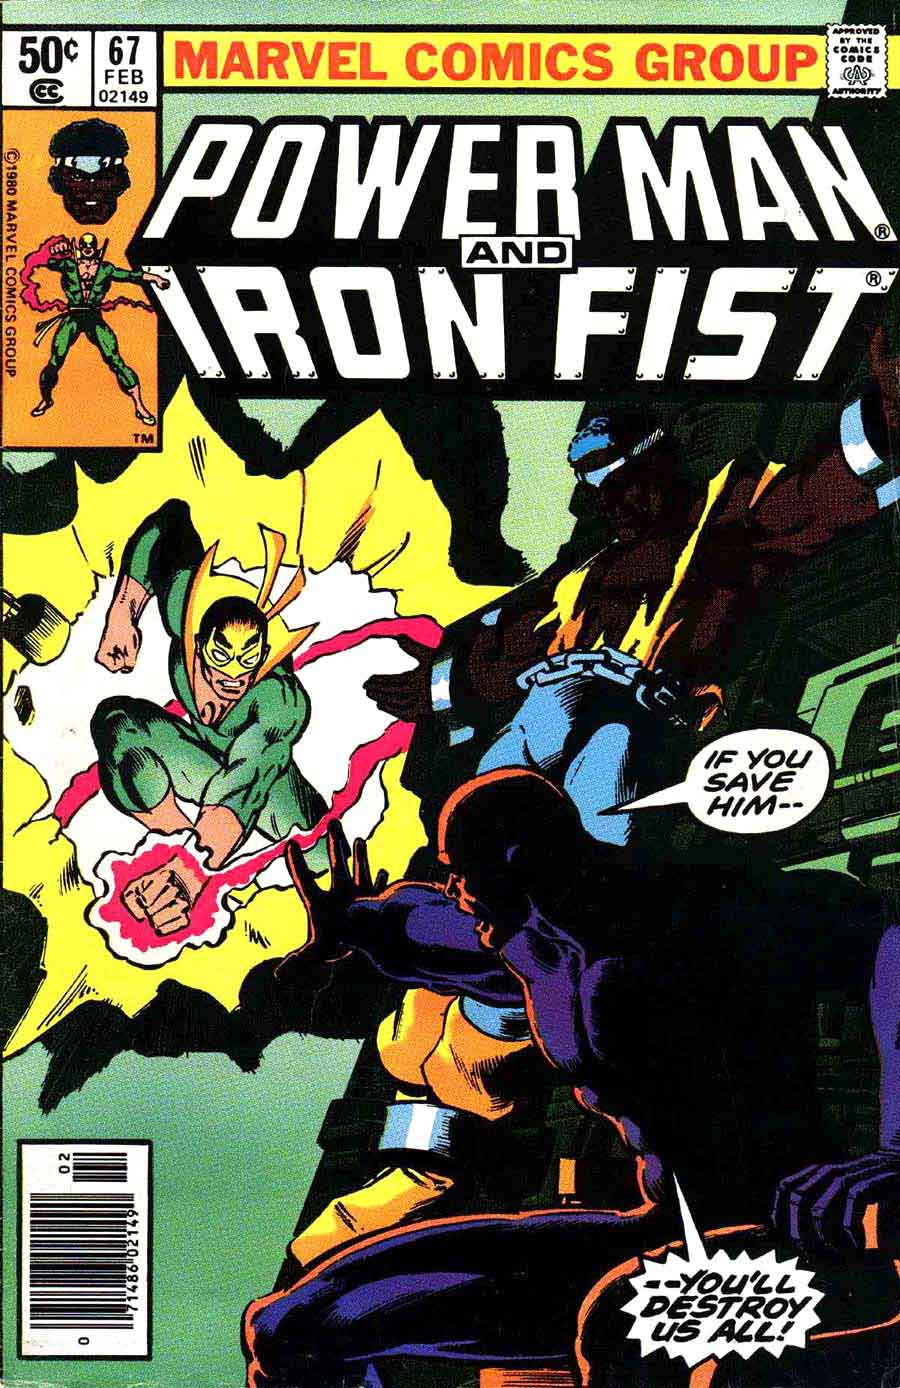 Power Man and Iron Fist #57 marvel 1980s comic book cover art by Frank Miller